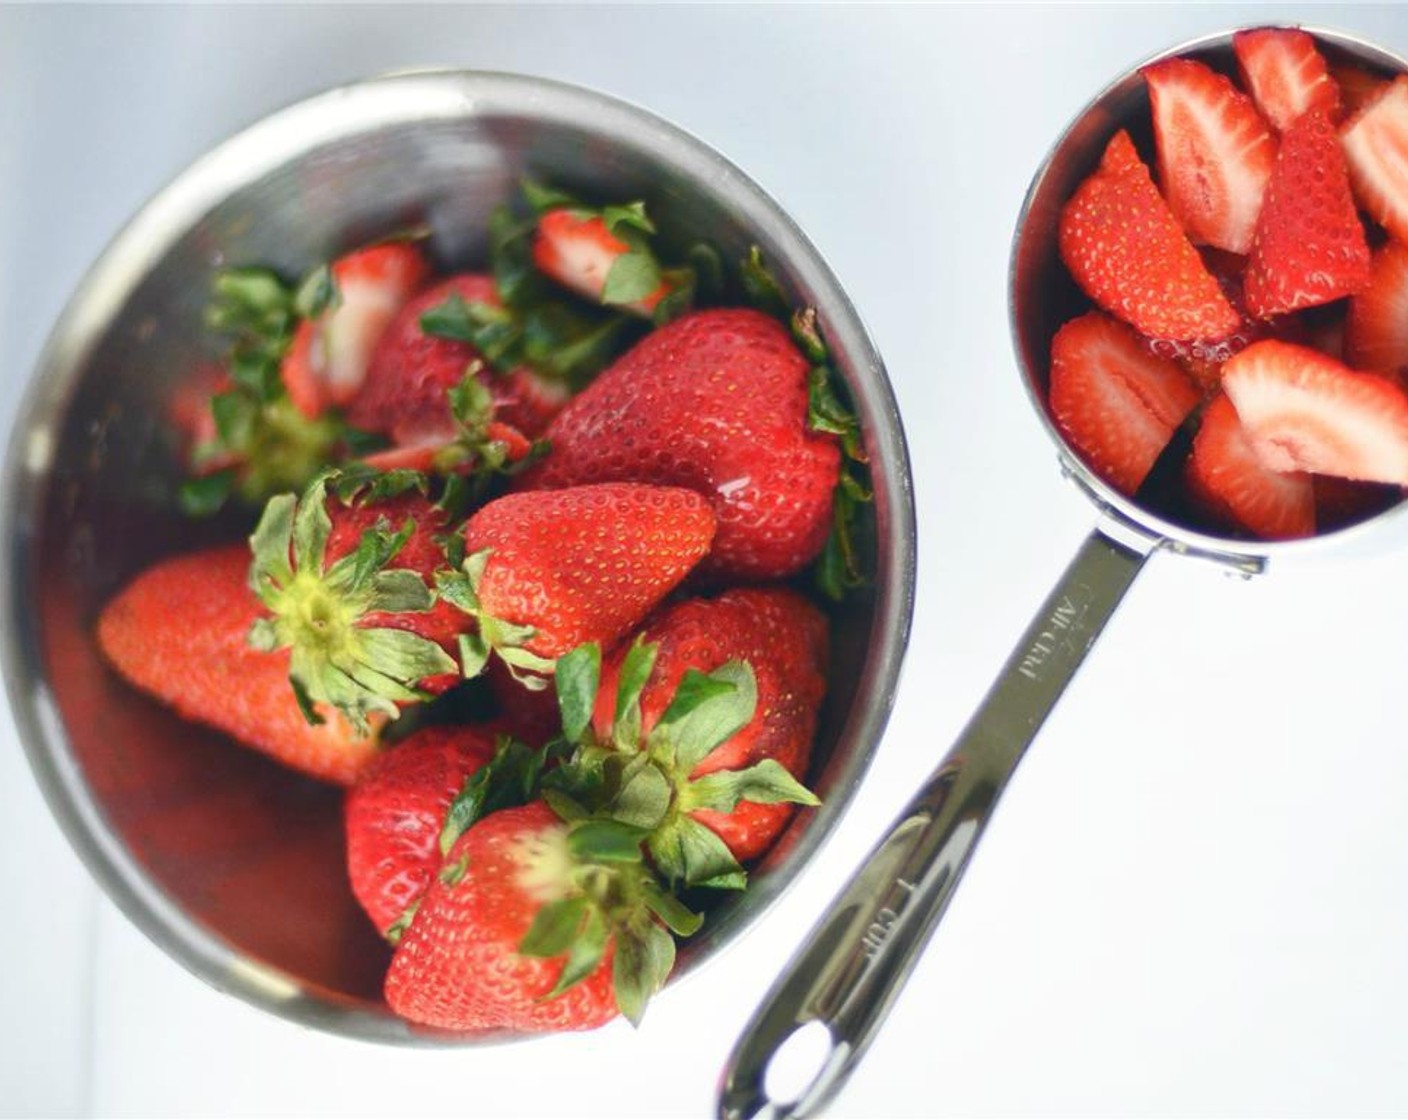 step 2 In a blender, combine sliced Fresh Strawberries (1 1/2 cups) and simple syrup. Blend until smooth. Store the strawberry simple syrup in a glass jar in the refrigerator.